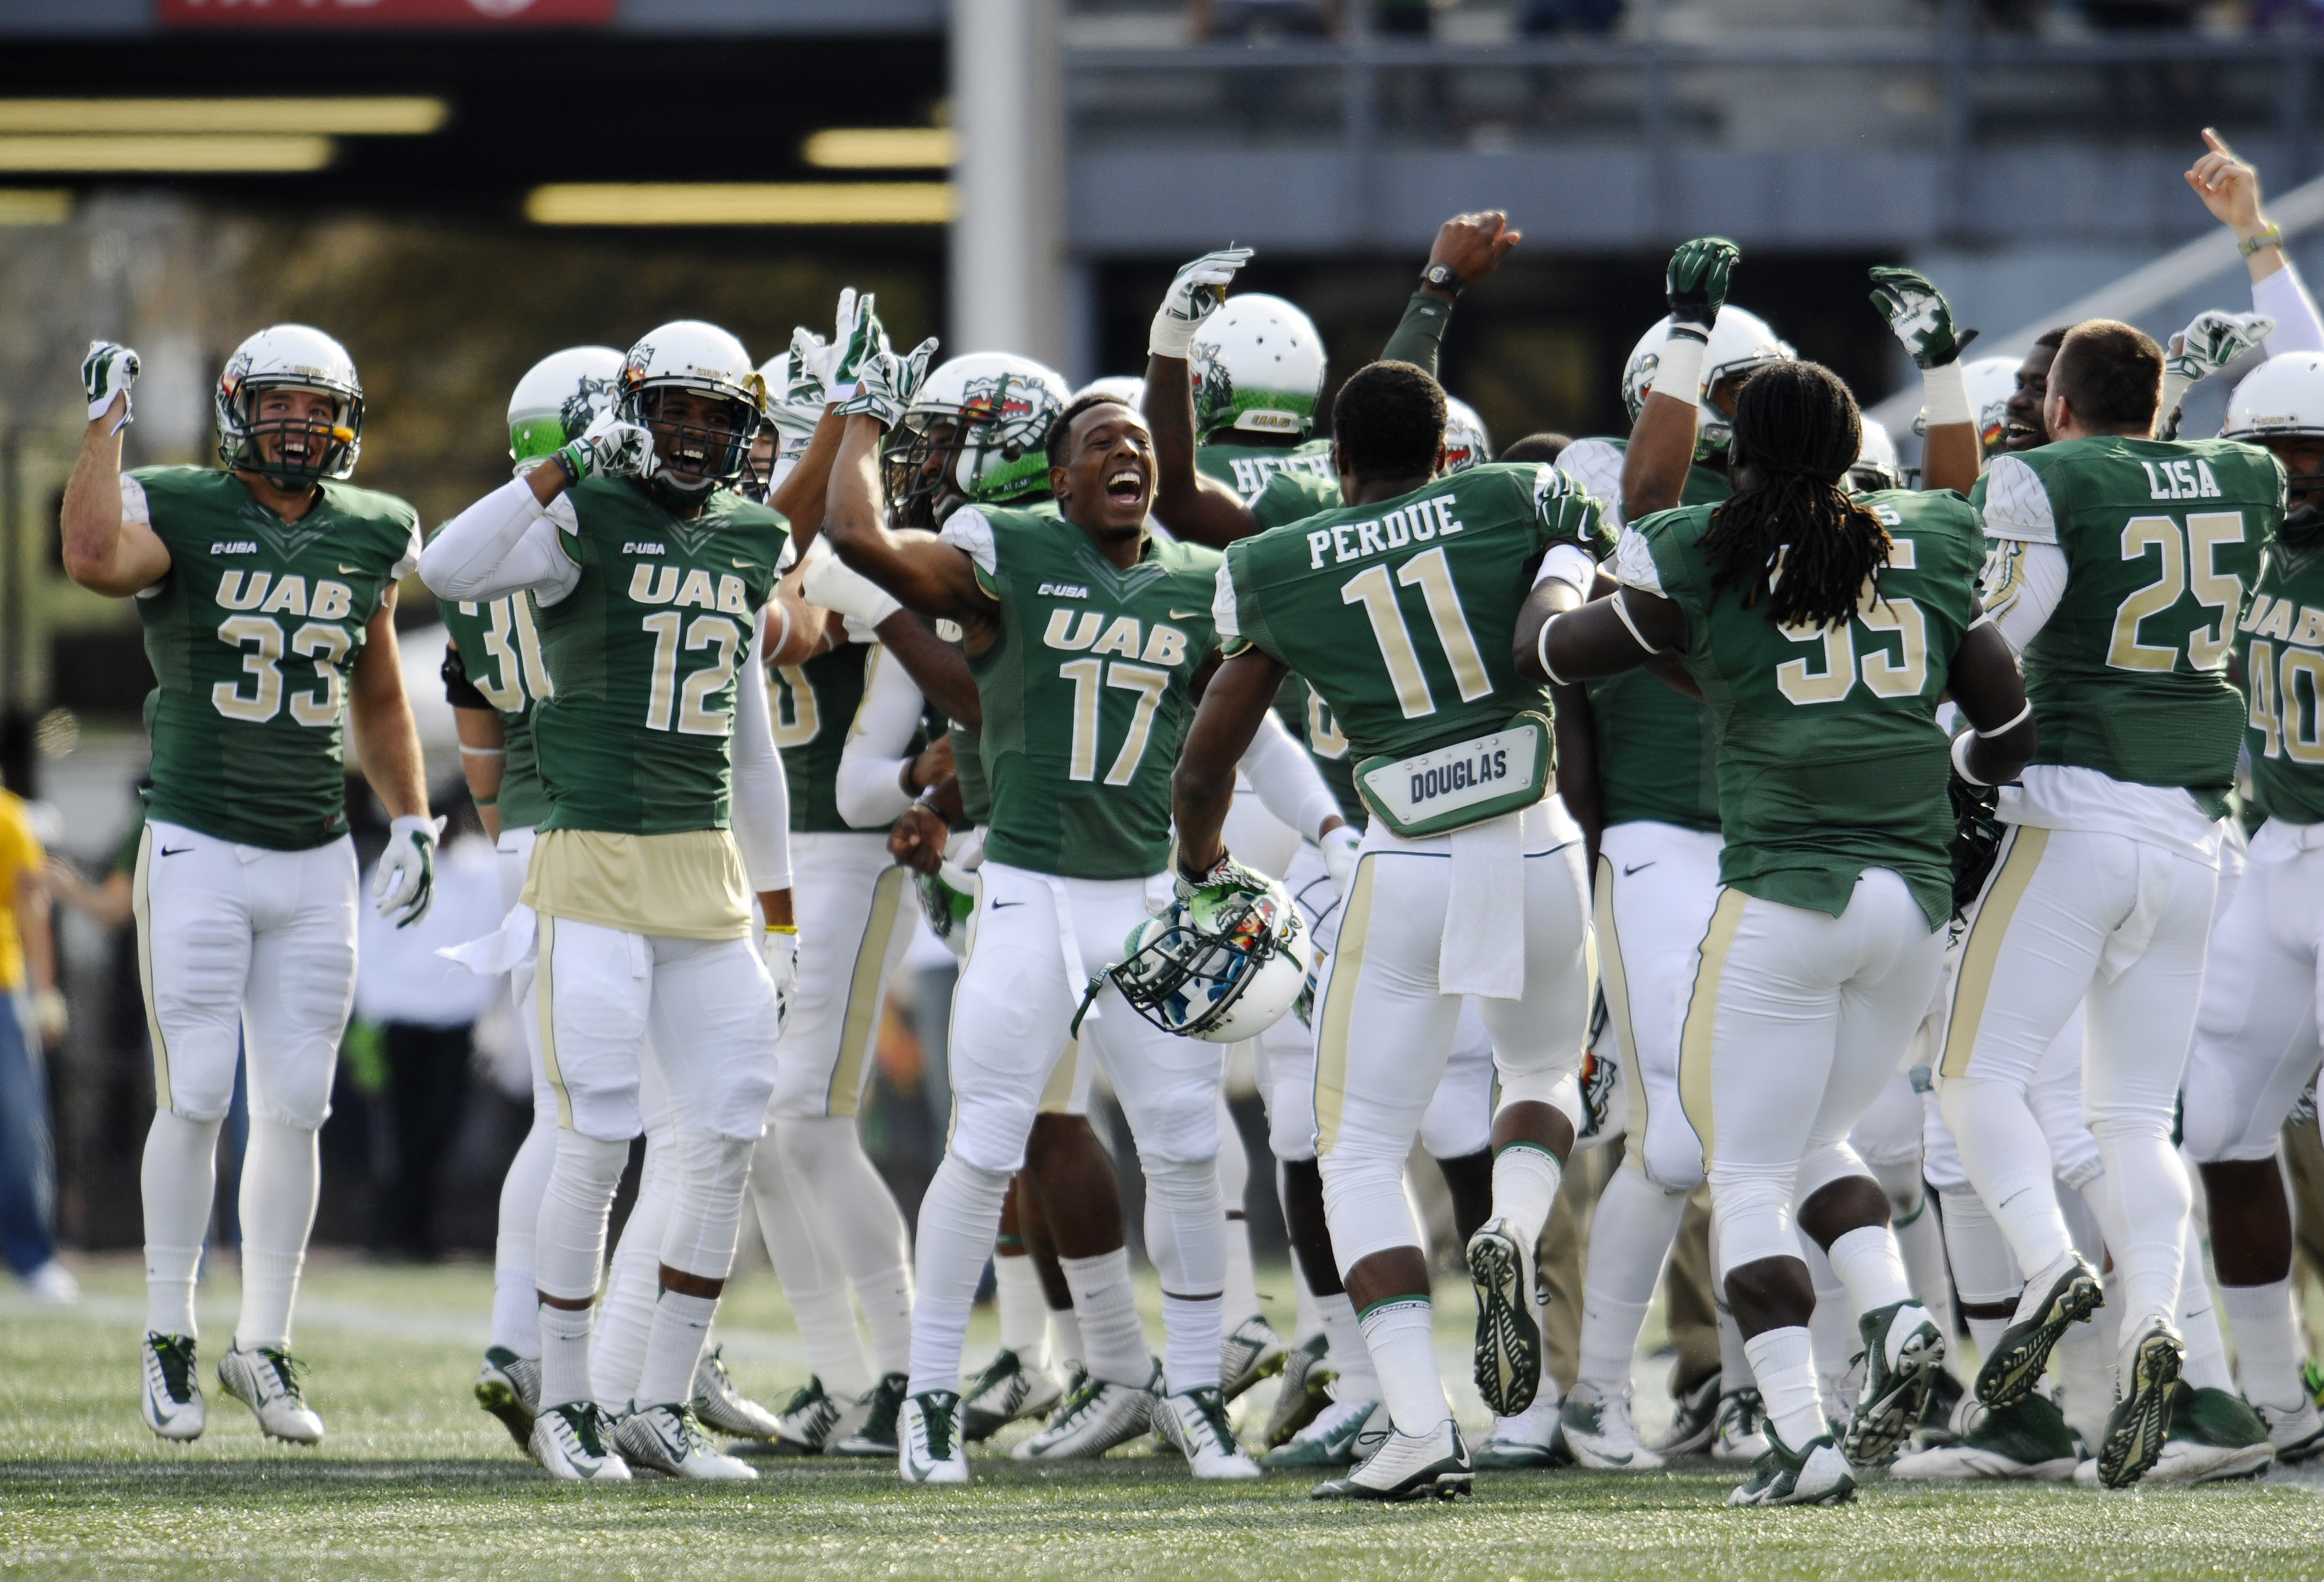 Celebrations can be short-lived; this was earlier in the season for the now-defunct UAB Blazers.